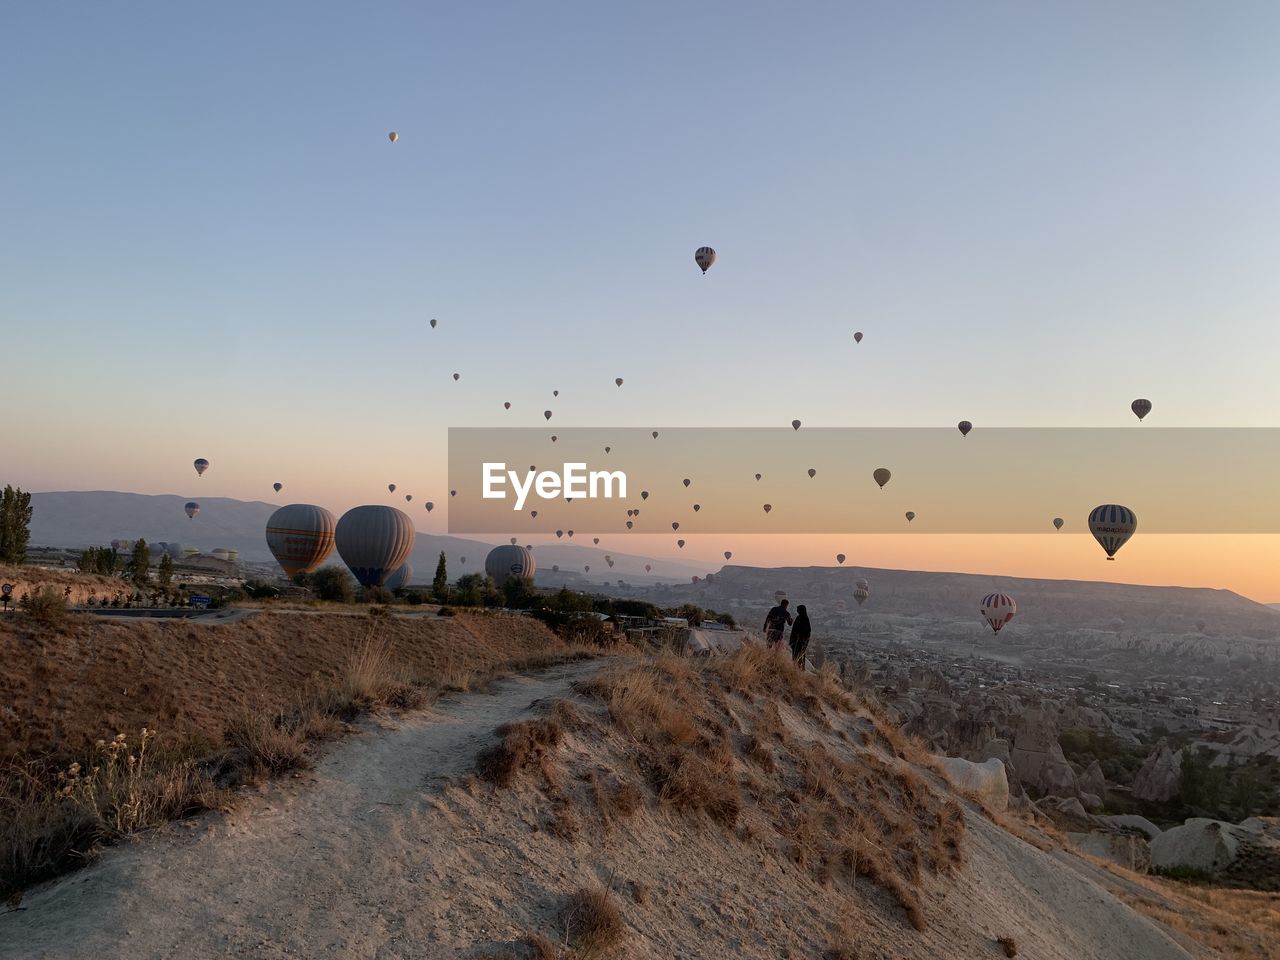 VIEW OF HOT AIR BALLOONS FLYING OVER LAND